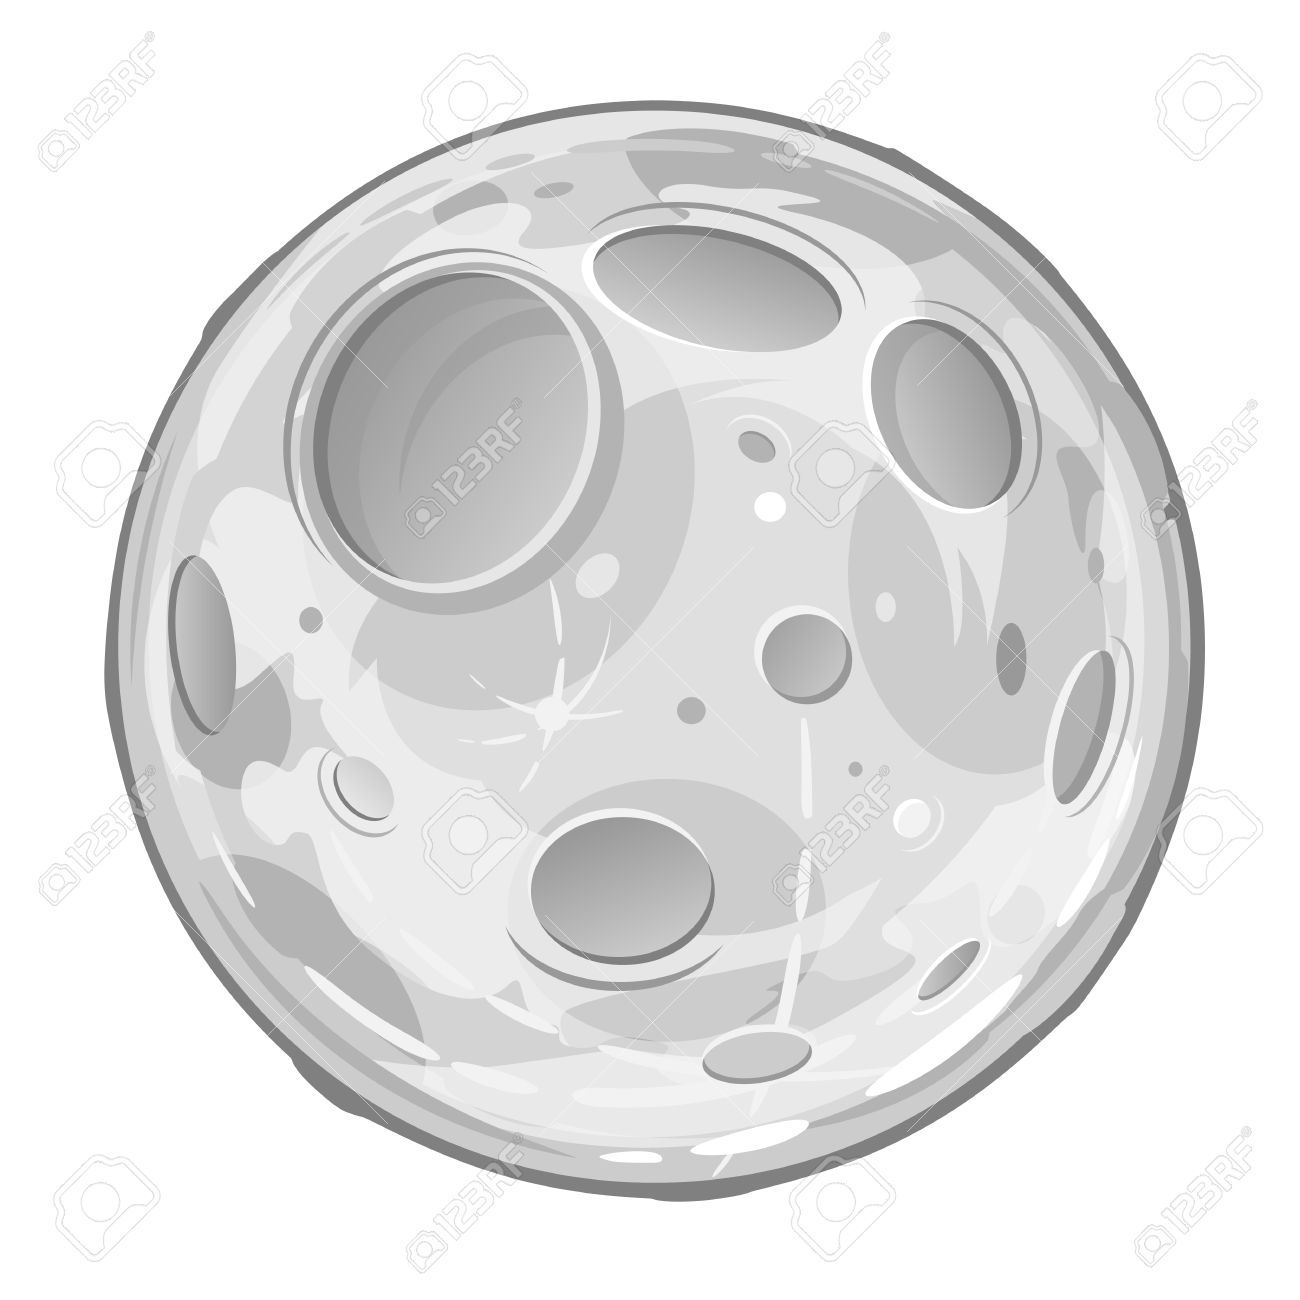 Full Moon cartoon with craters in gray colors, isolated.